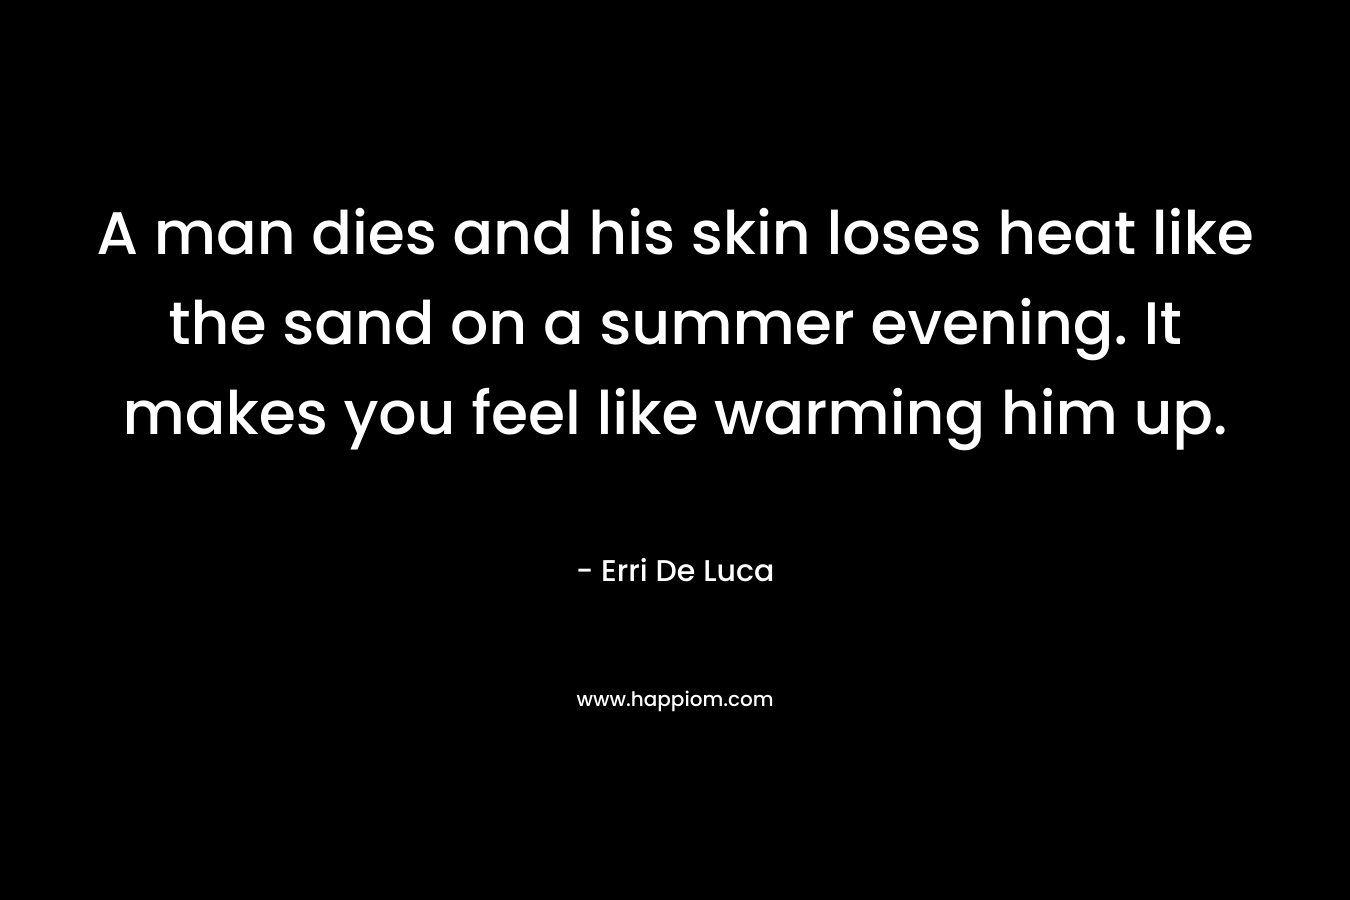 A man dies and his skin loses heat like the sand on a summer evening. It makes you feel like warming him up. – Erri De Luca